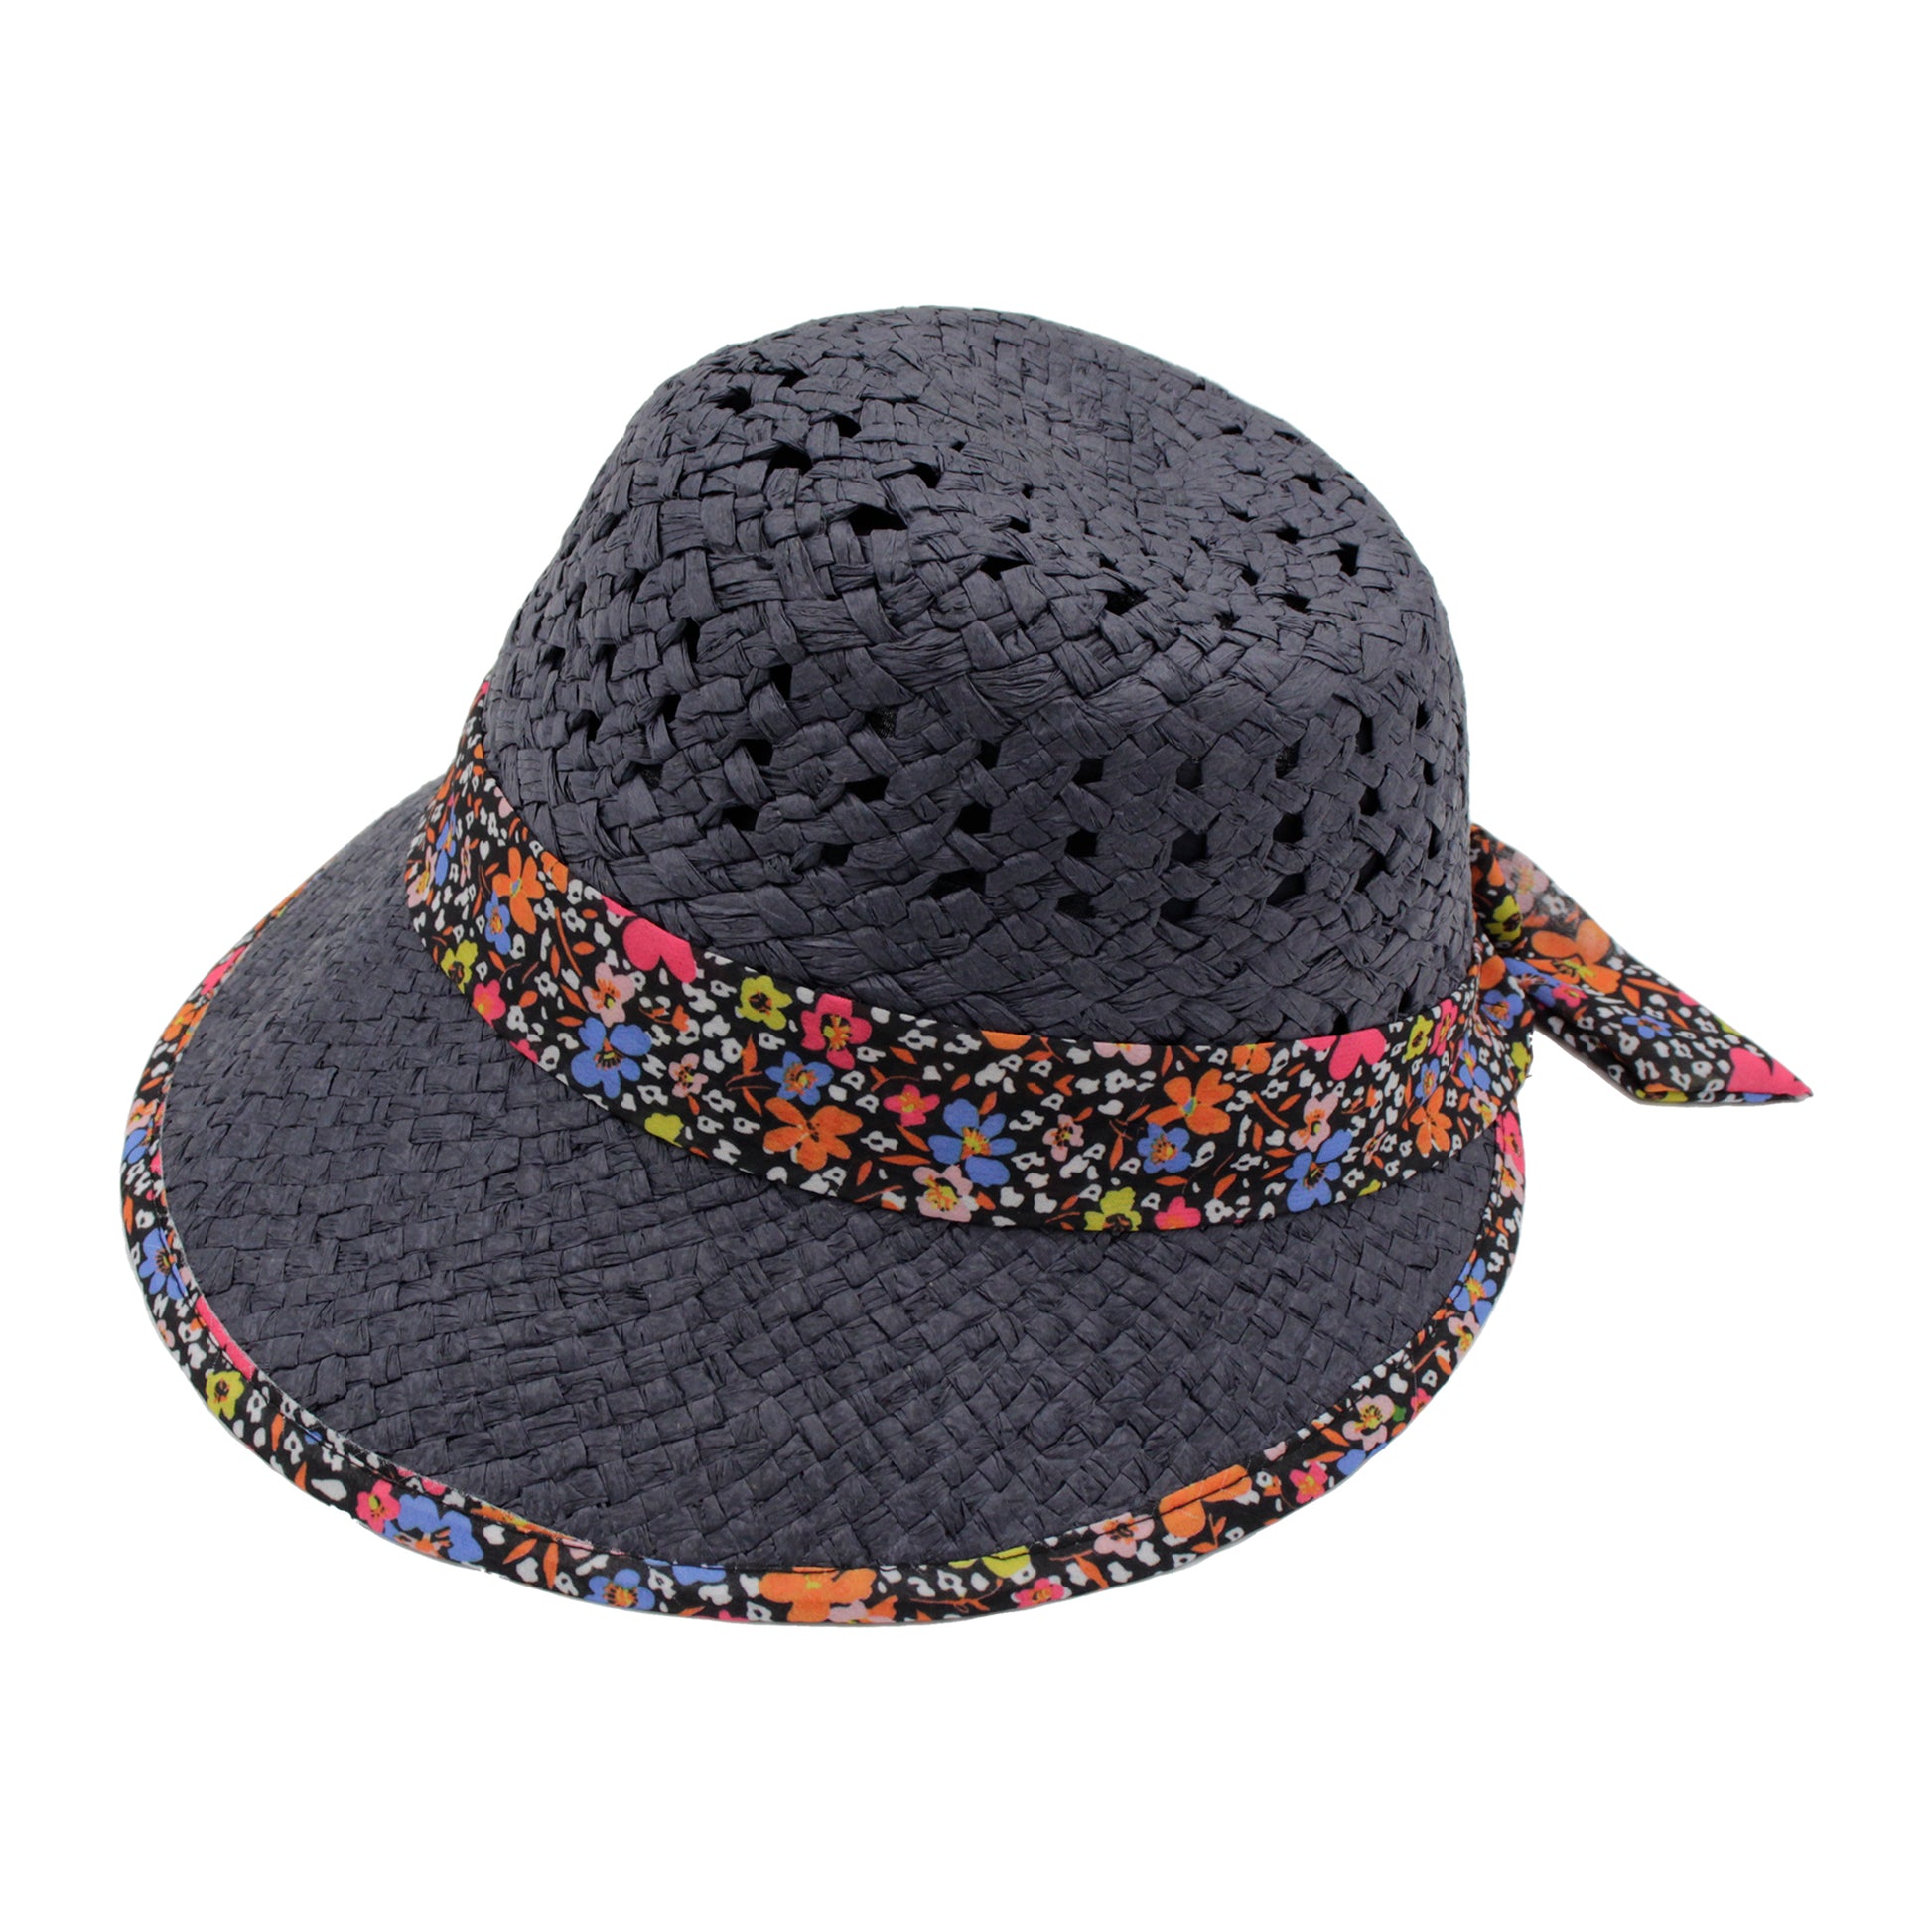 Boho Floral Black Sun Hat Hollow Out Crochet Wide Brim Straw Hats Summer UV Protection Travel Beach Hats For Women - ACCEHUT